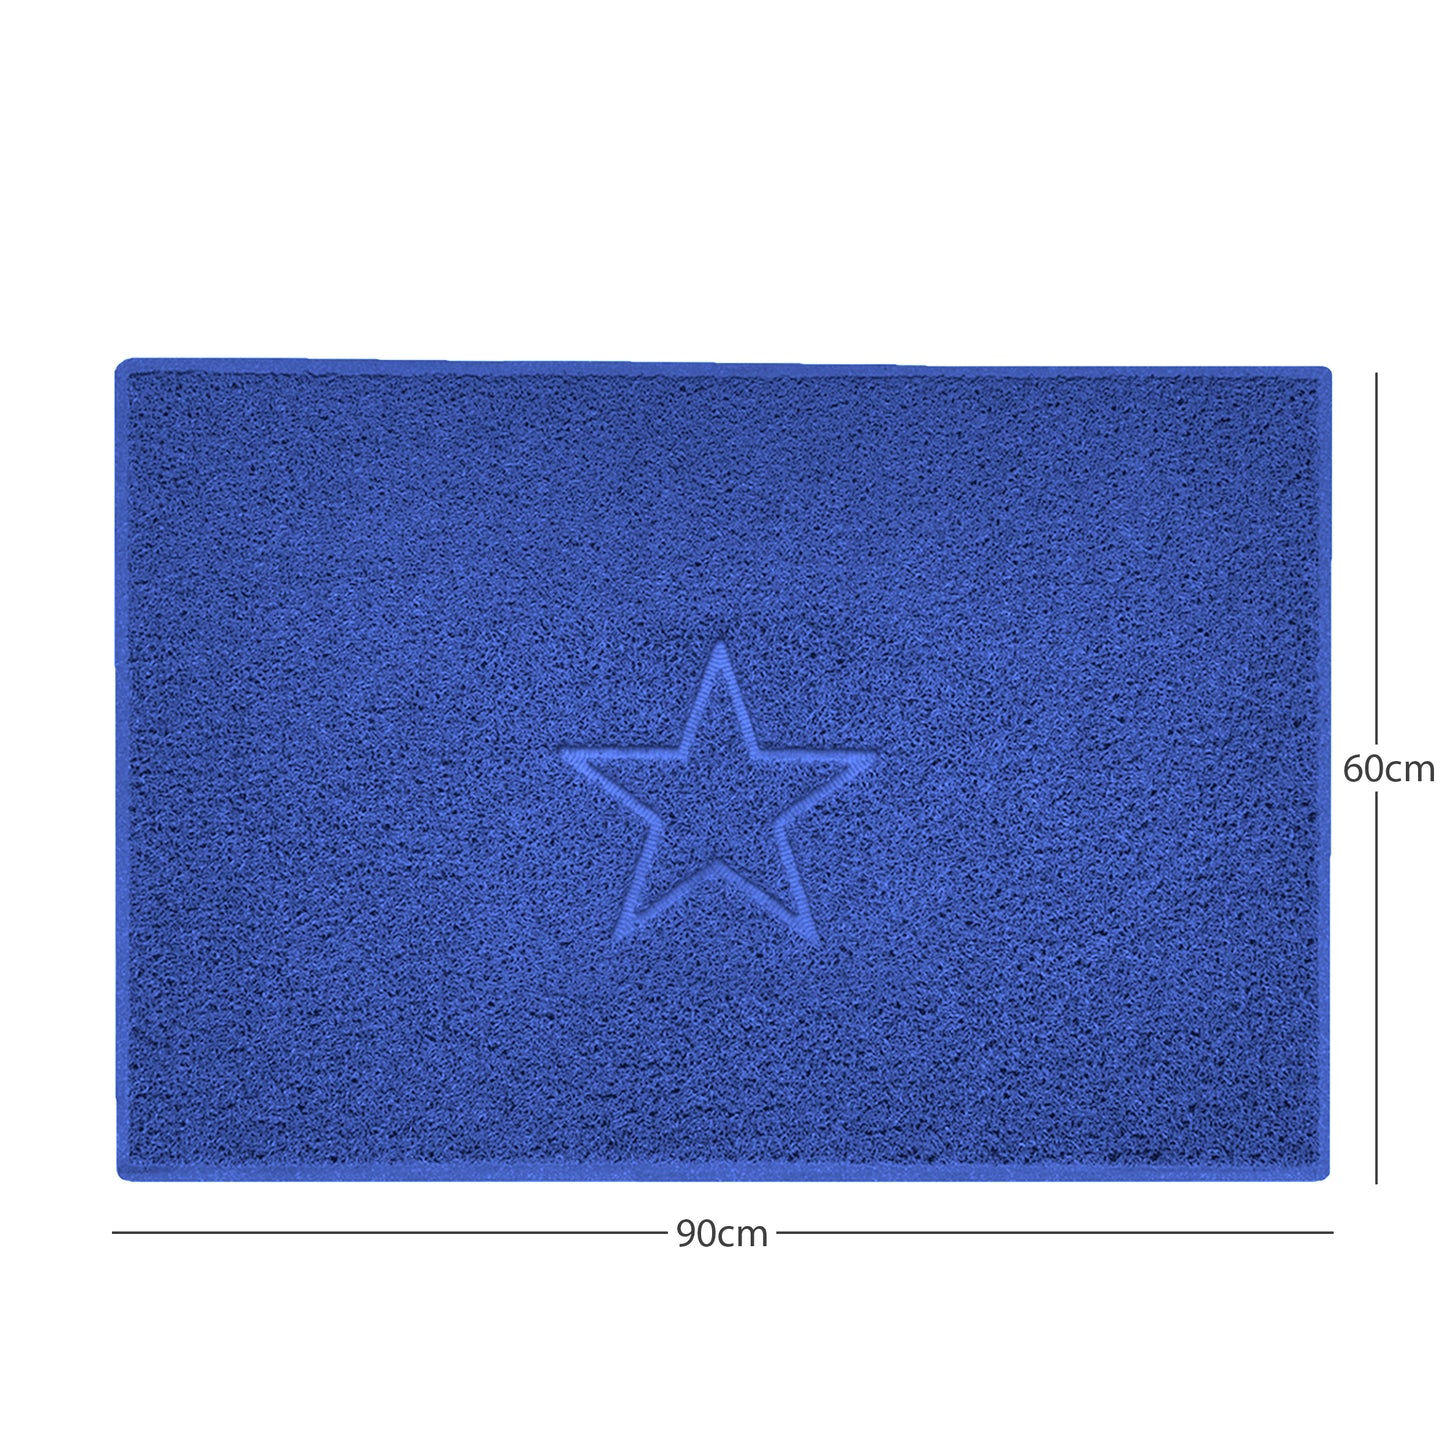 nicoman blue spaghetti indoor mat, multi colour options, free delivery, uk made